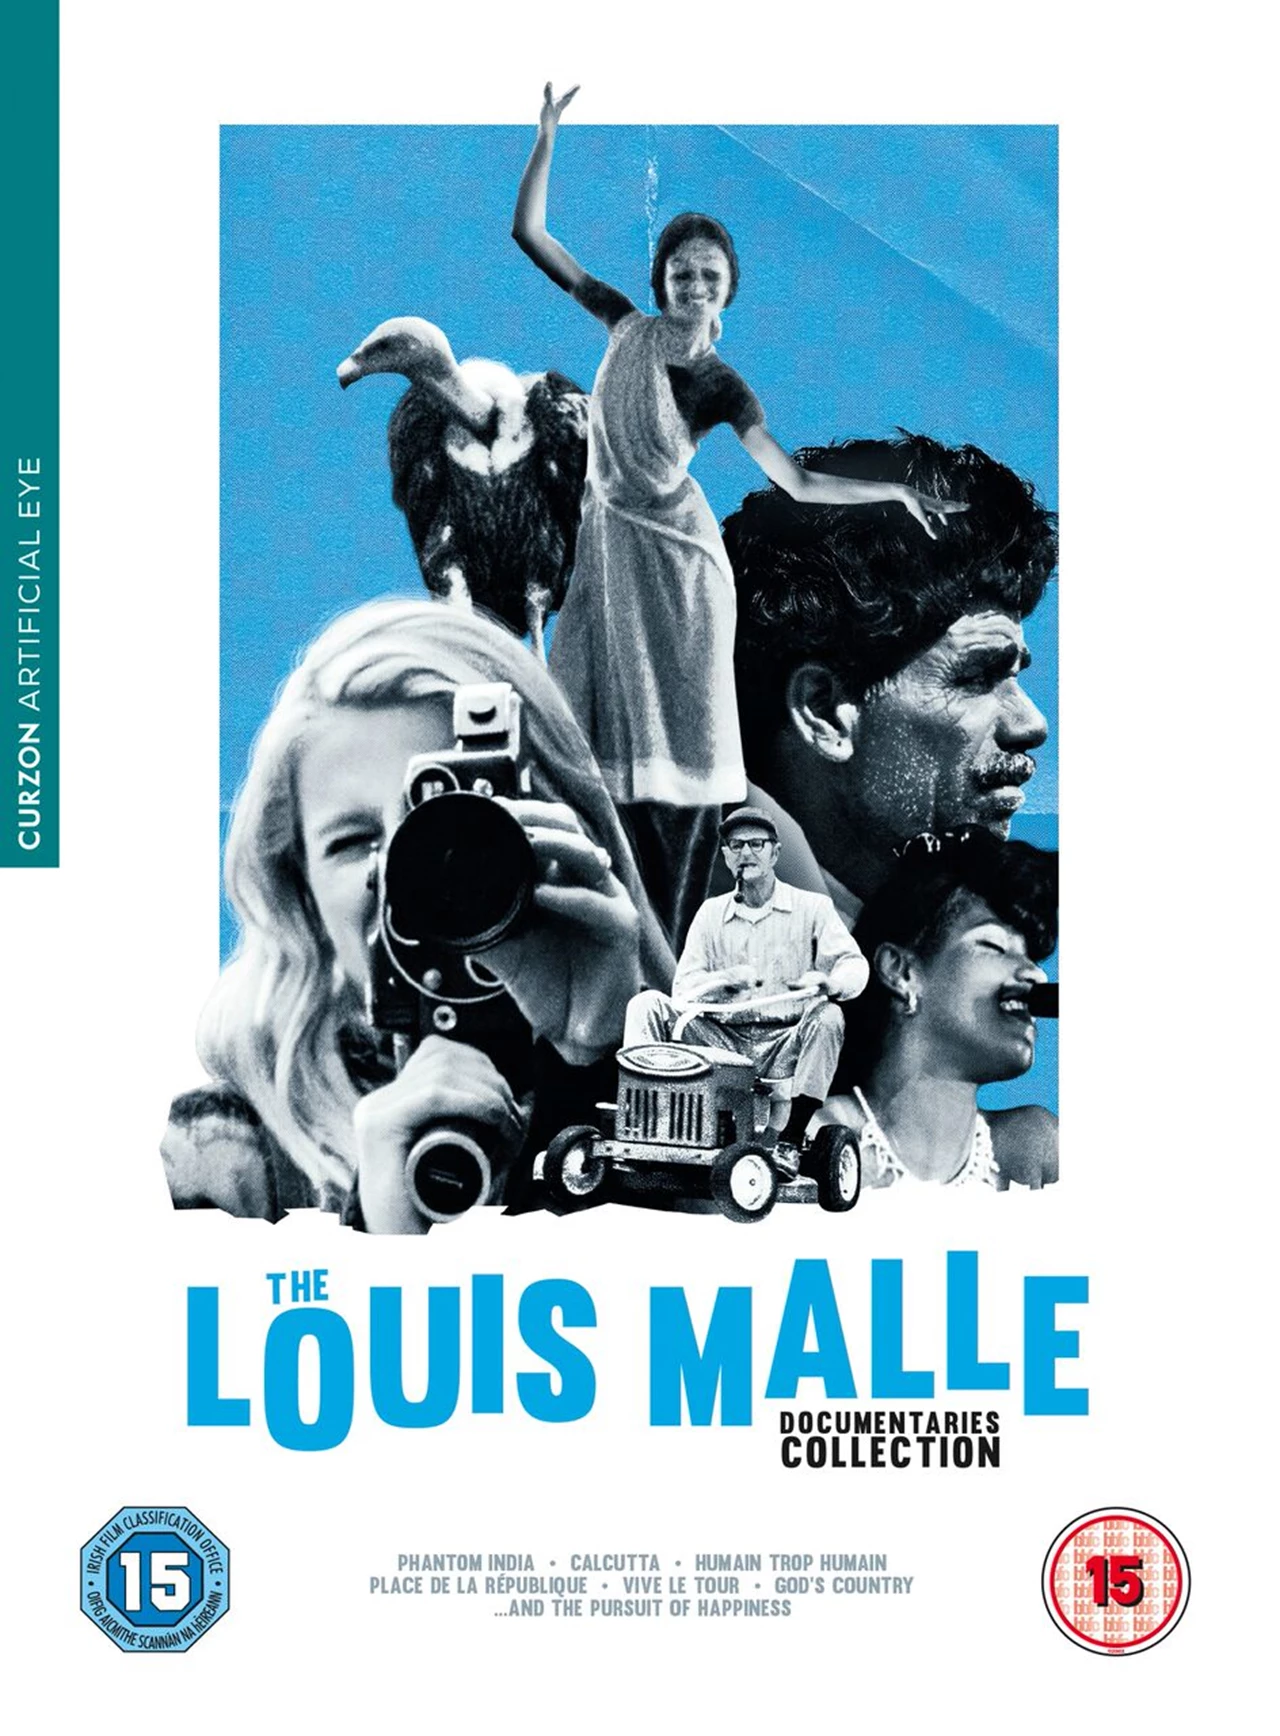 The Chaste Sensuality of Director Louis Malle